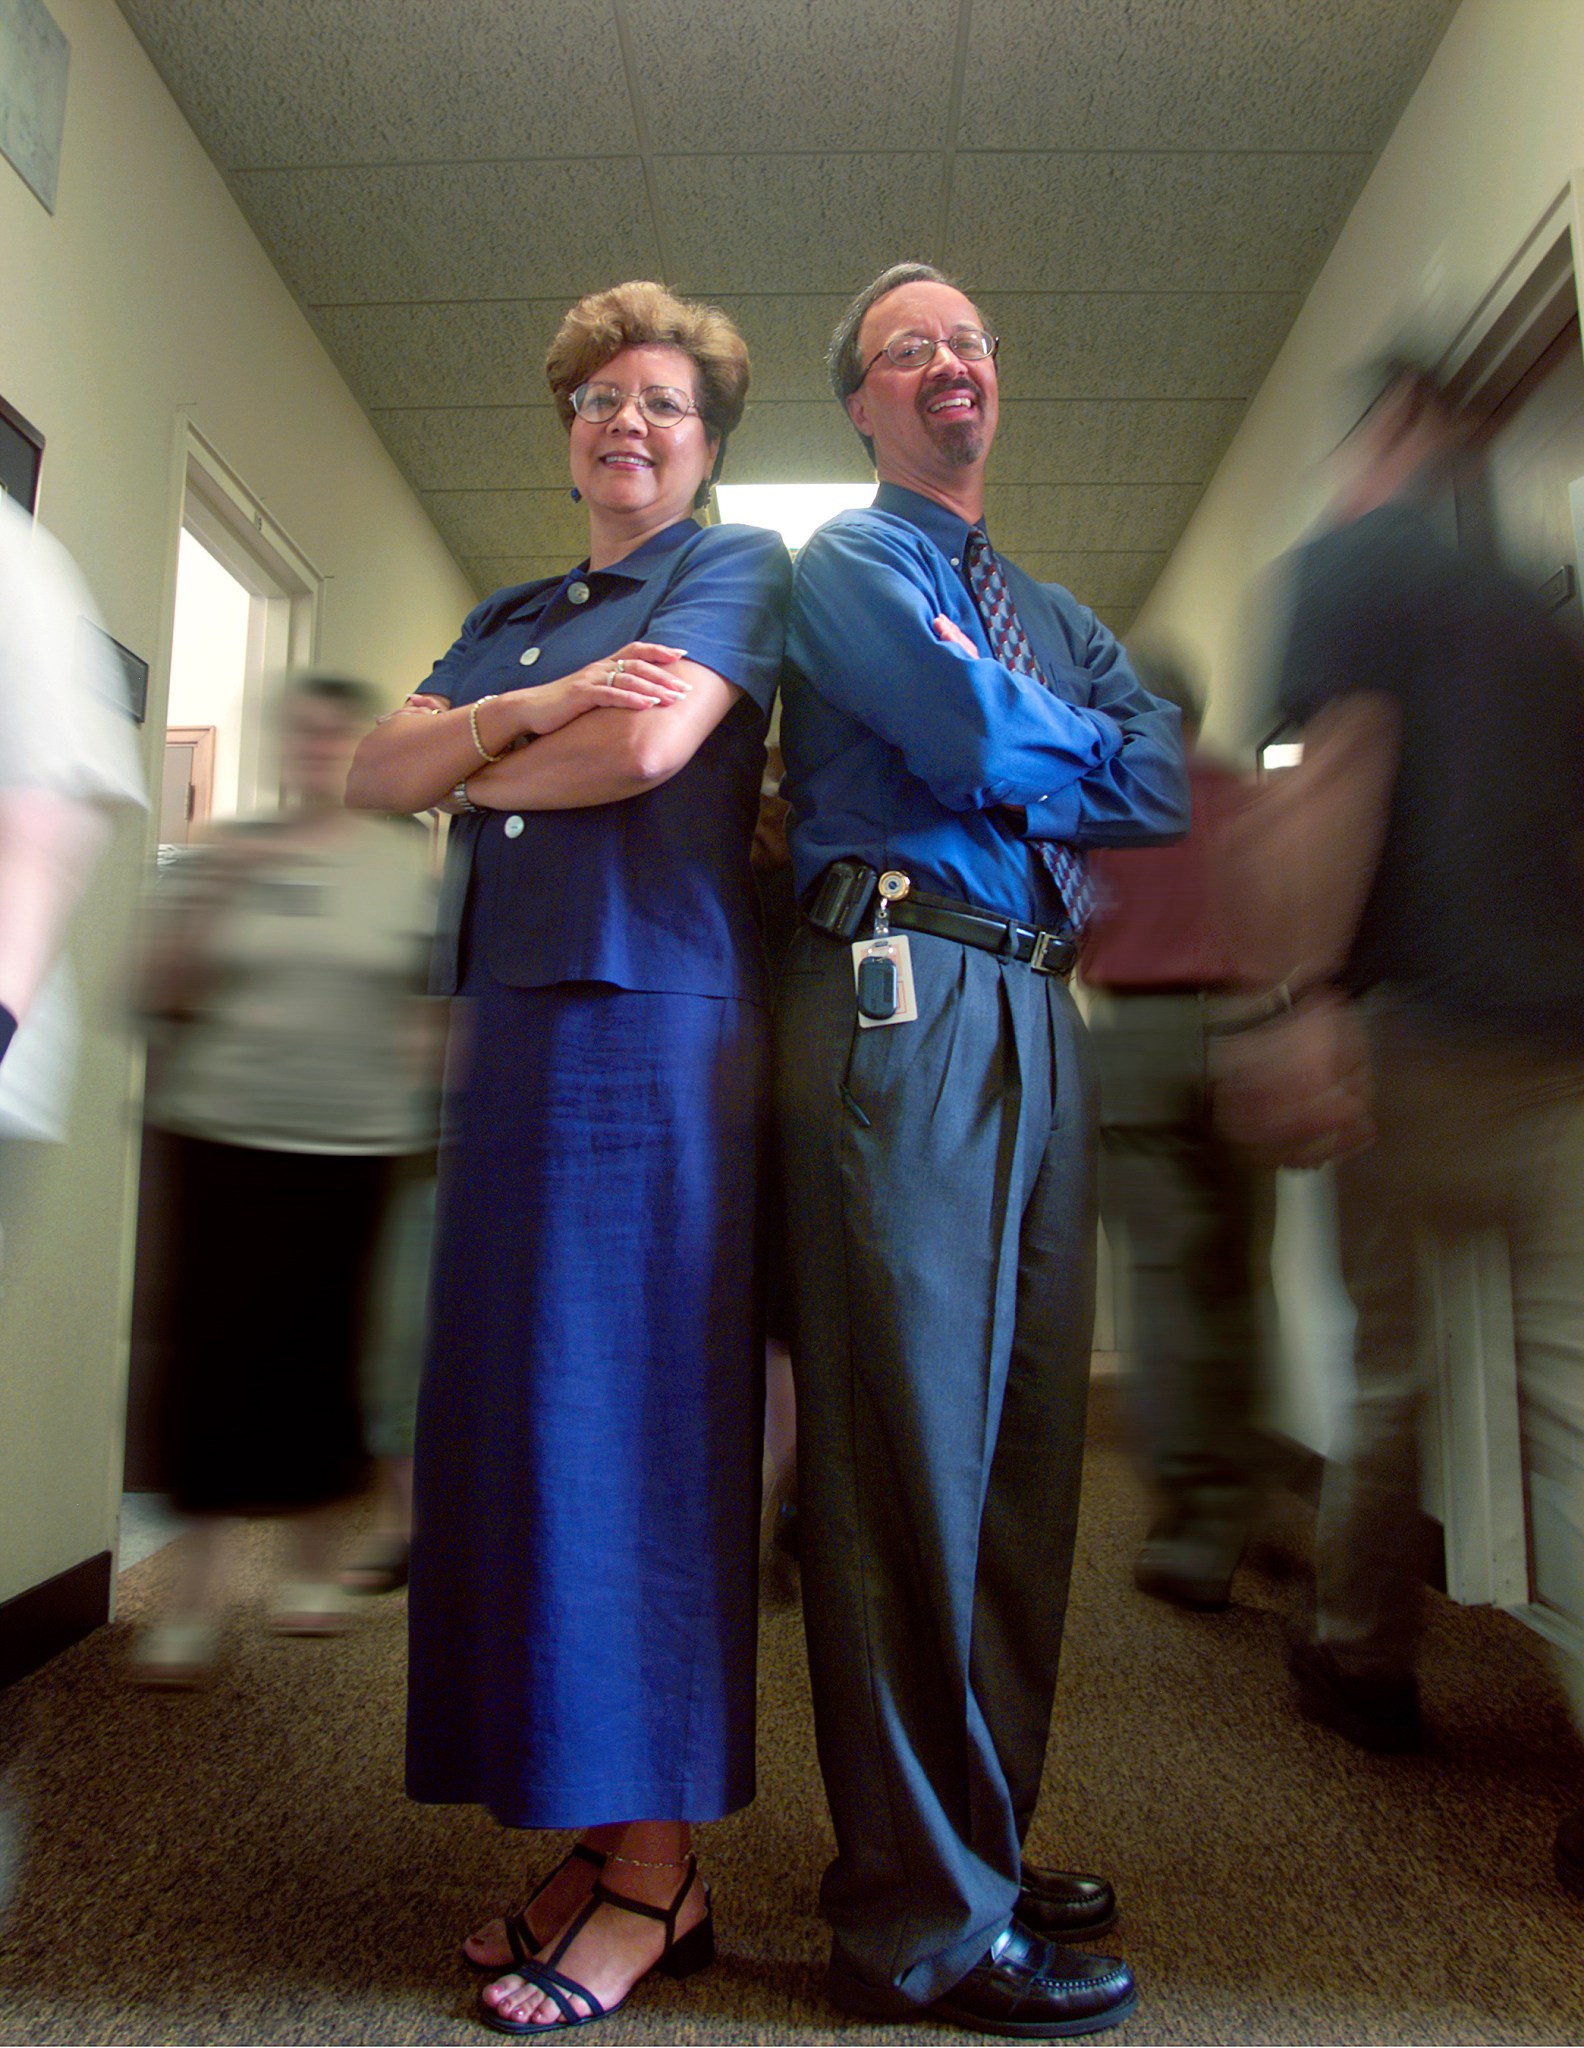 Man and woman standing in hallway.